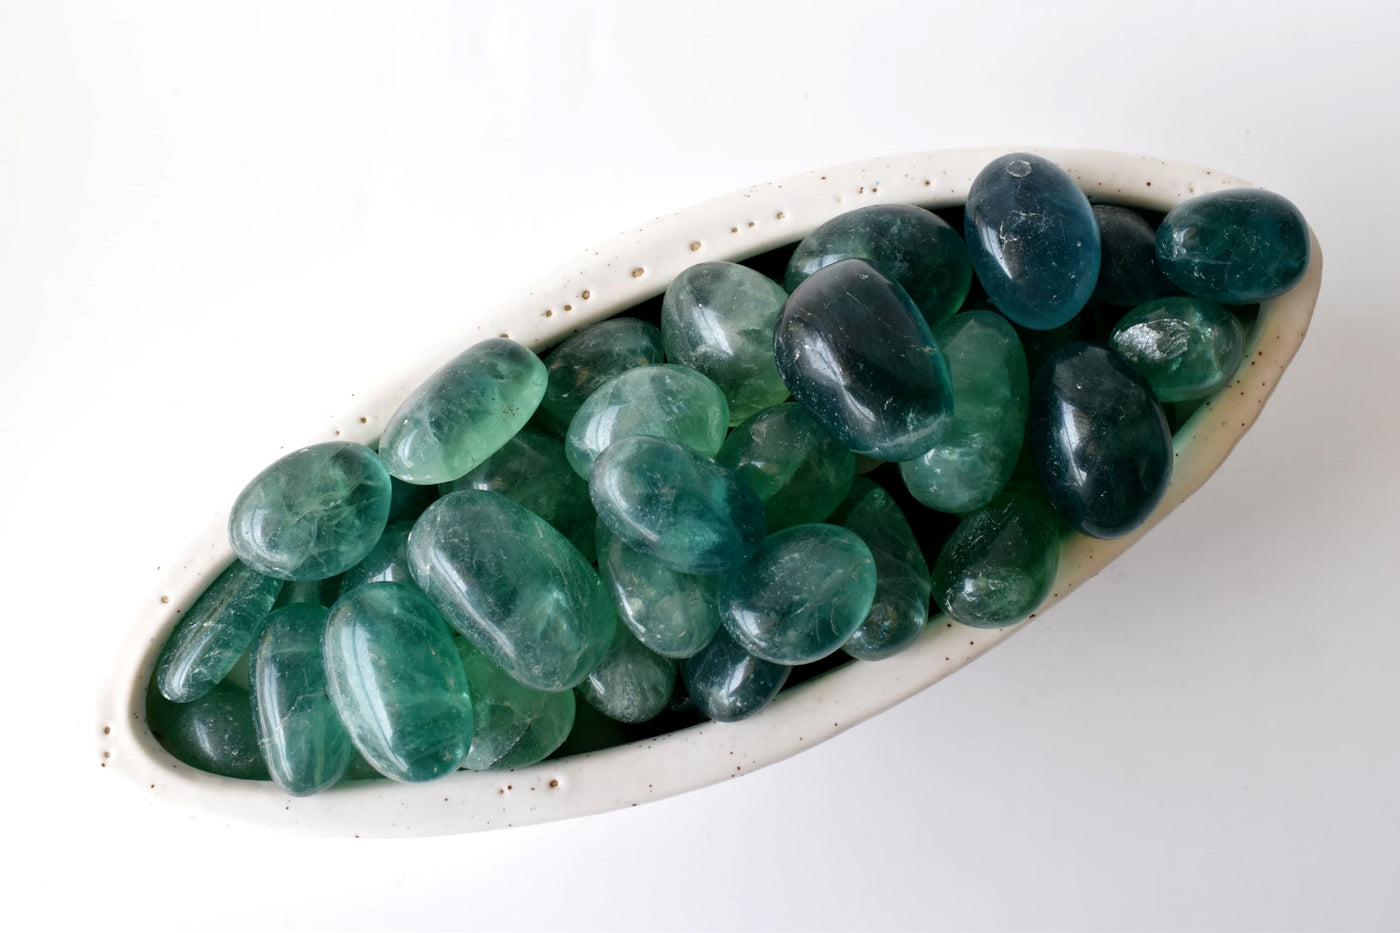 Green Fluorite Tumbled Crystals (Bring Balance and Clearing)